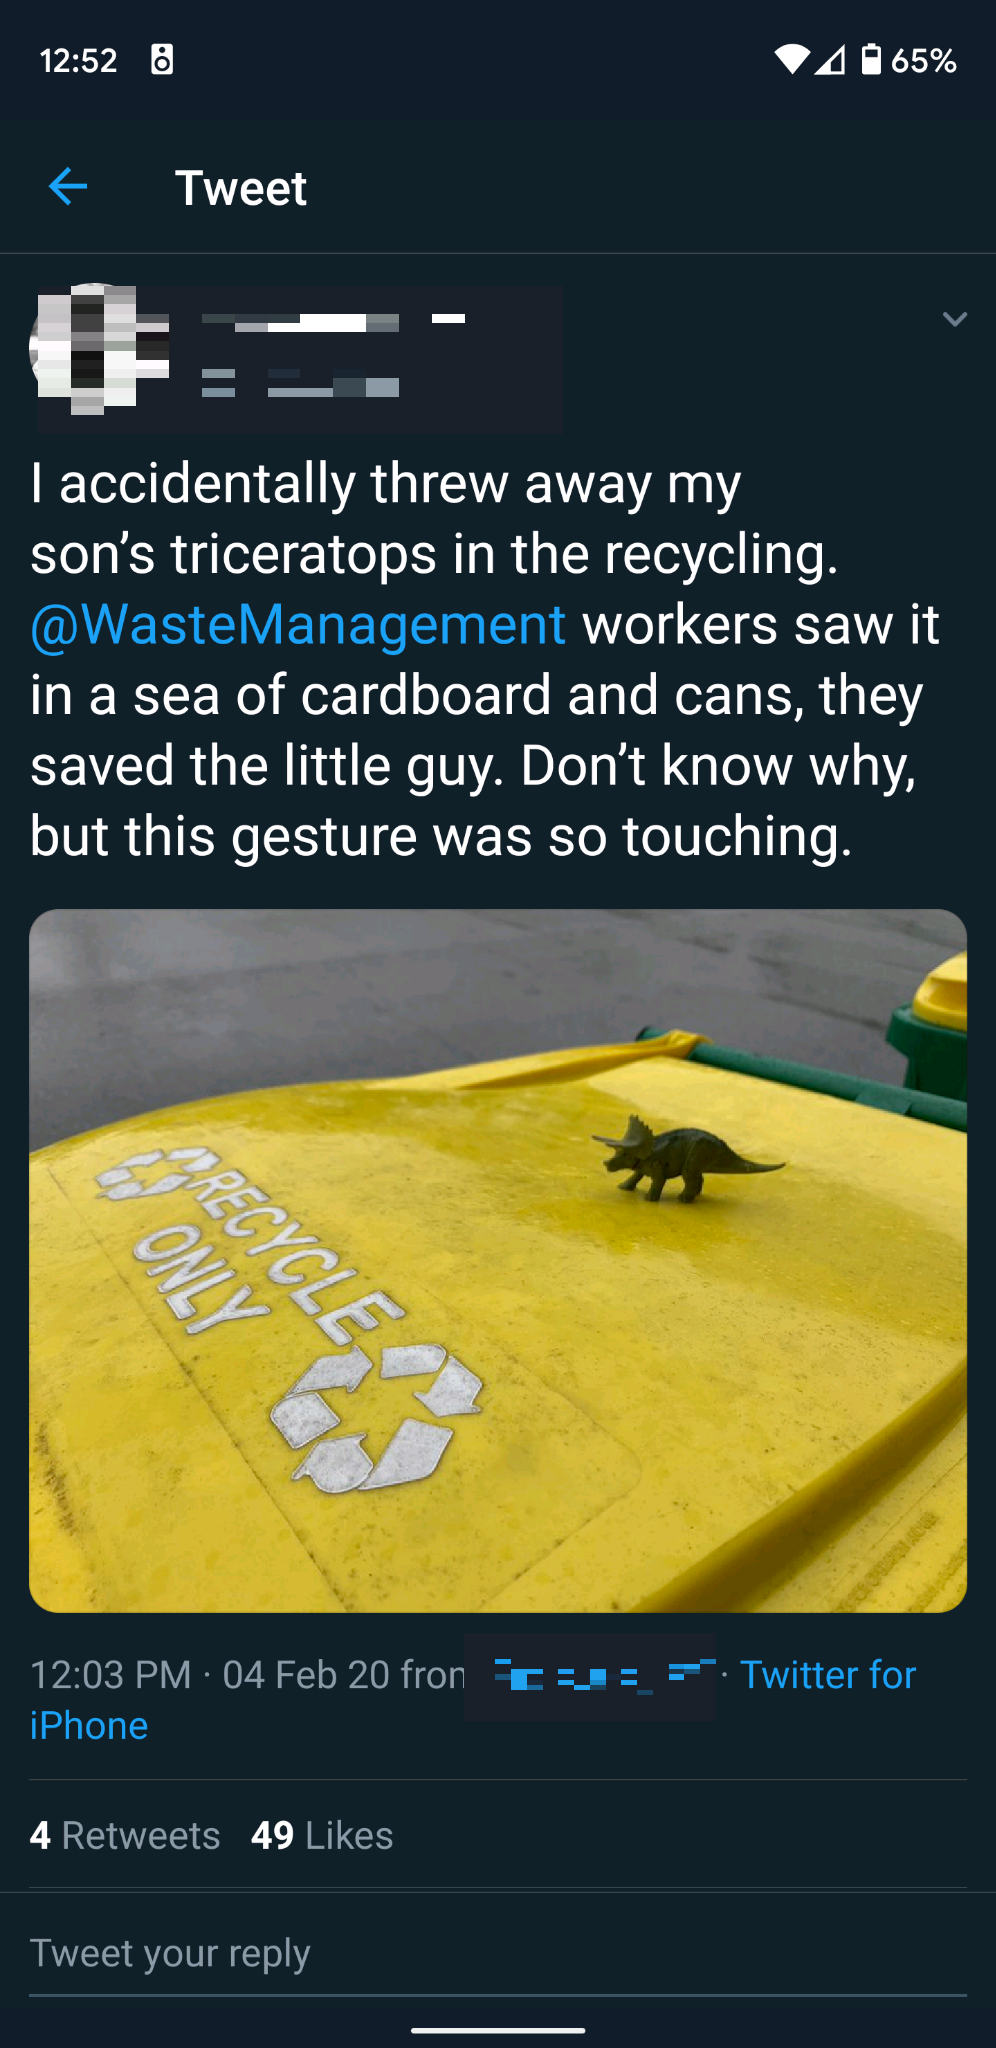 screenshot - 4 65% Tweet I accidentally threw away my son's triceratops in the recycling. Management workers saw it in a sea of cardboard and cans, they saved the little guy. Don't know why, but this gesture was so touching. Recycle W Only 04 Feb 20 from 